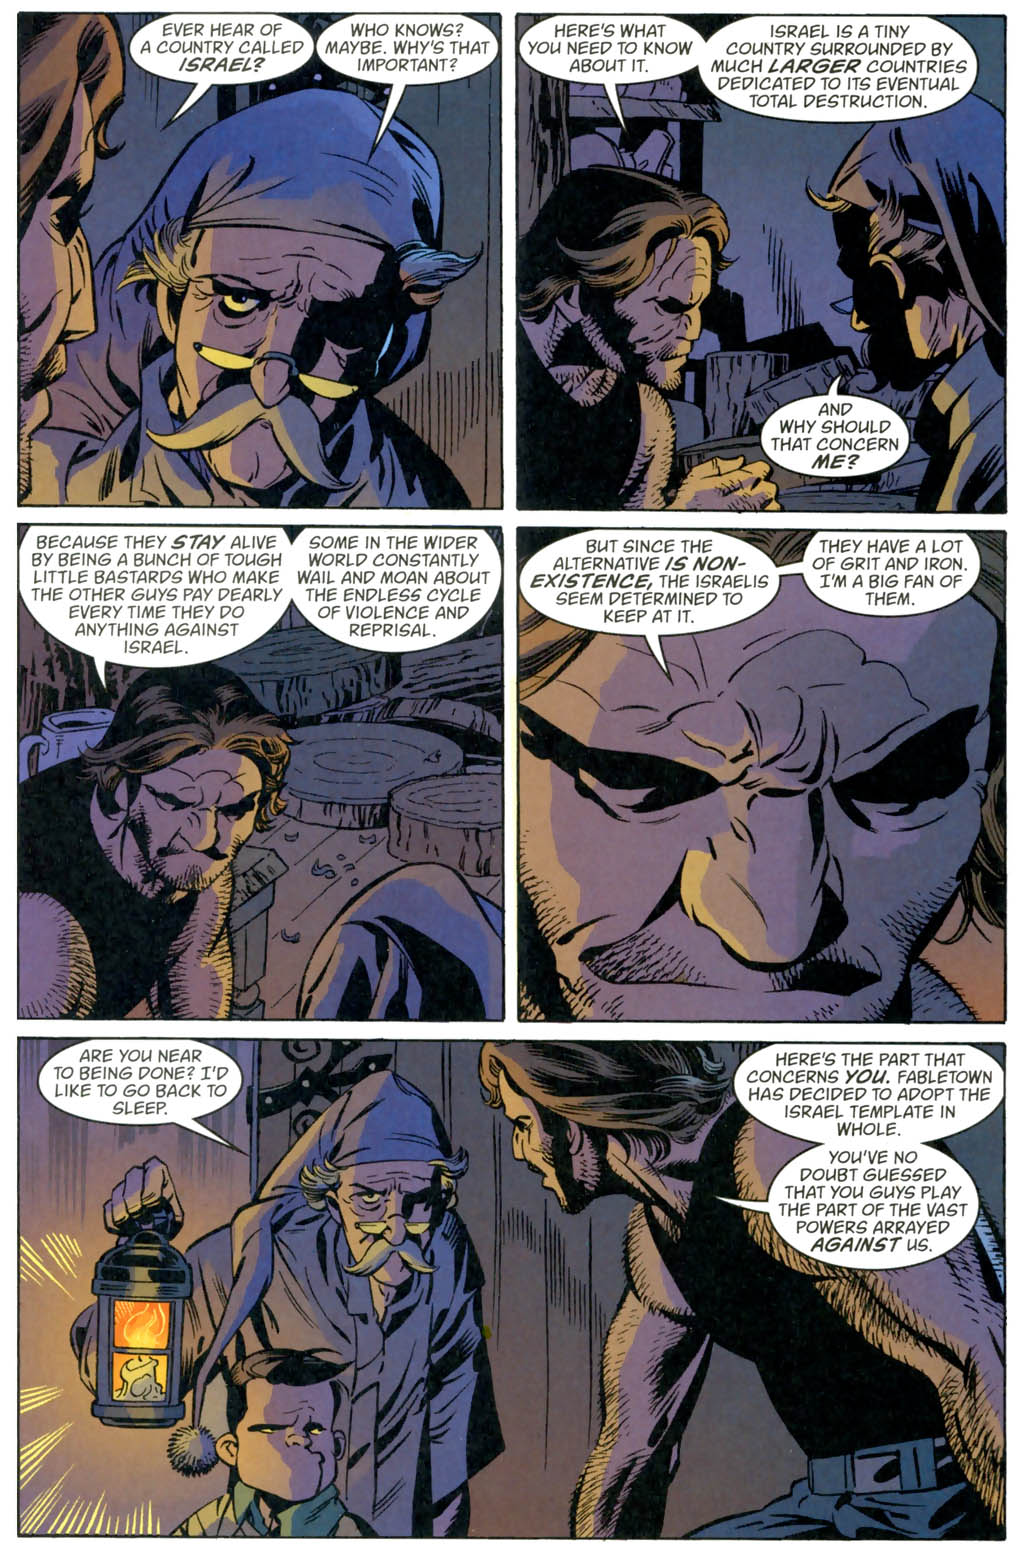 Fables+050+-+Mr.+%2526+Mrs.+Wolf.cbr+-+Page+23.jpg